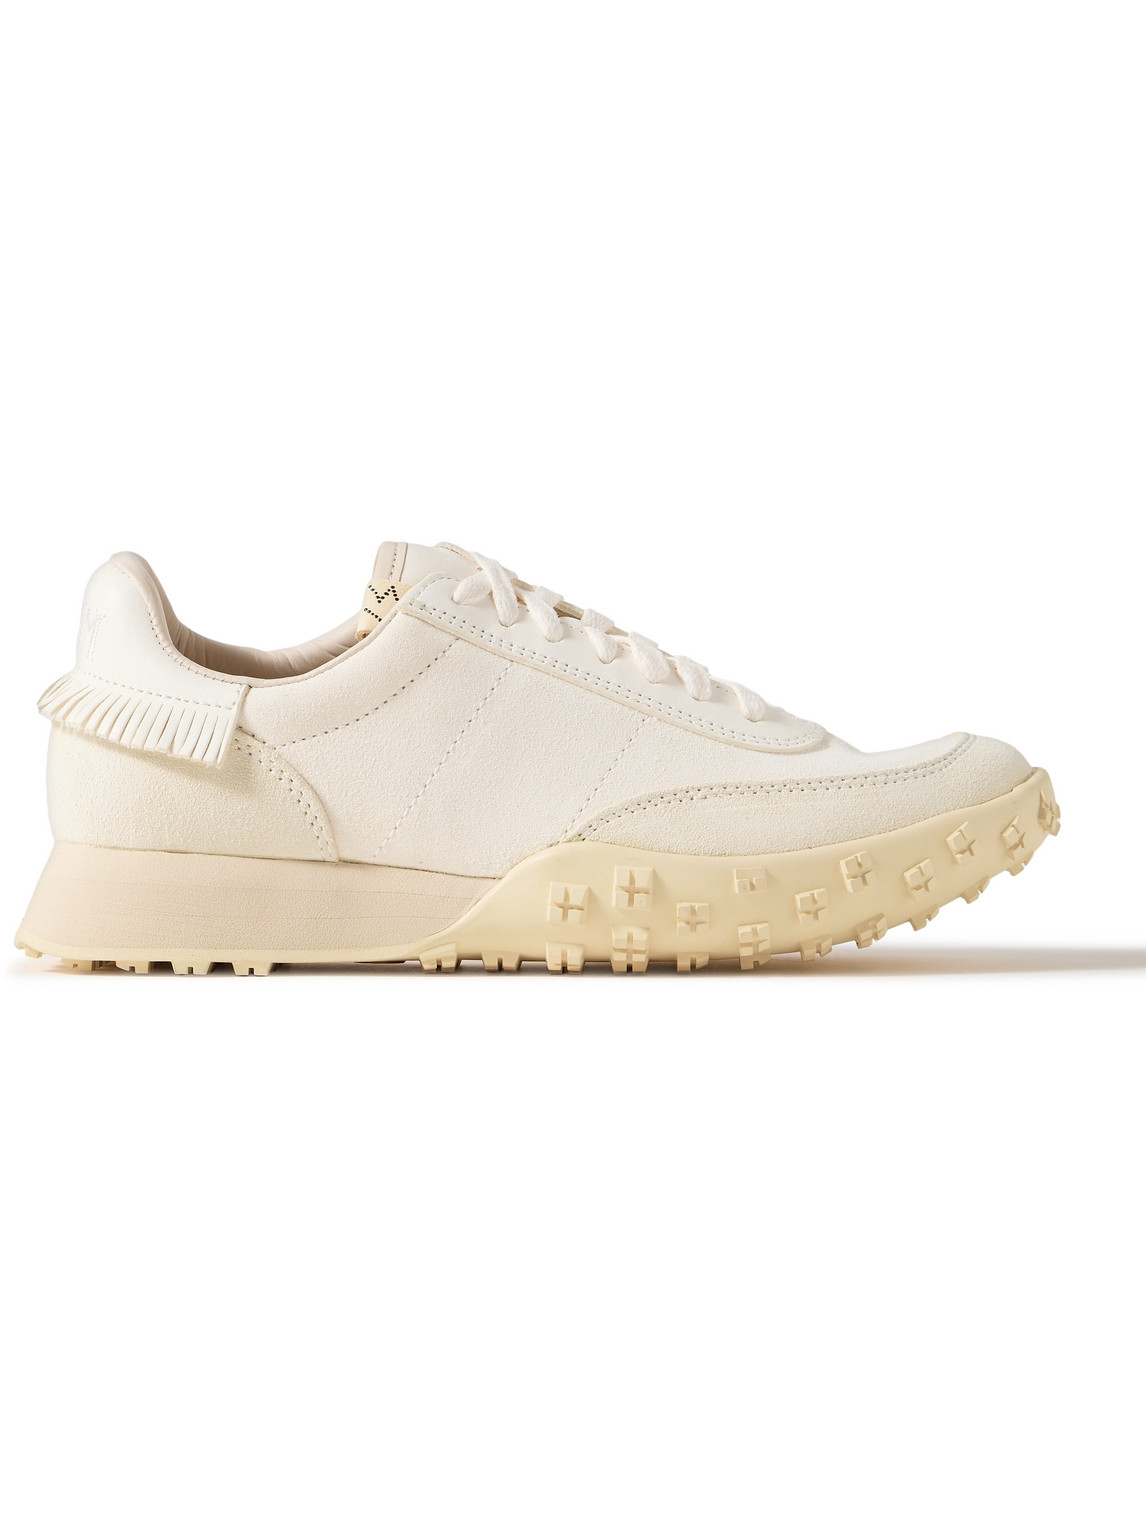 Visvim Hospoa Fringed Leather-trimmed Suede Sneakers In White